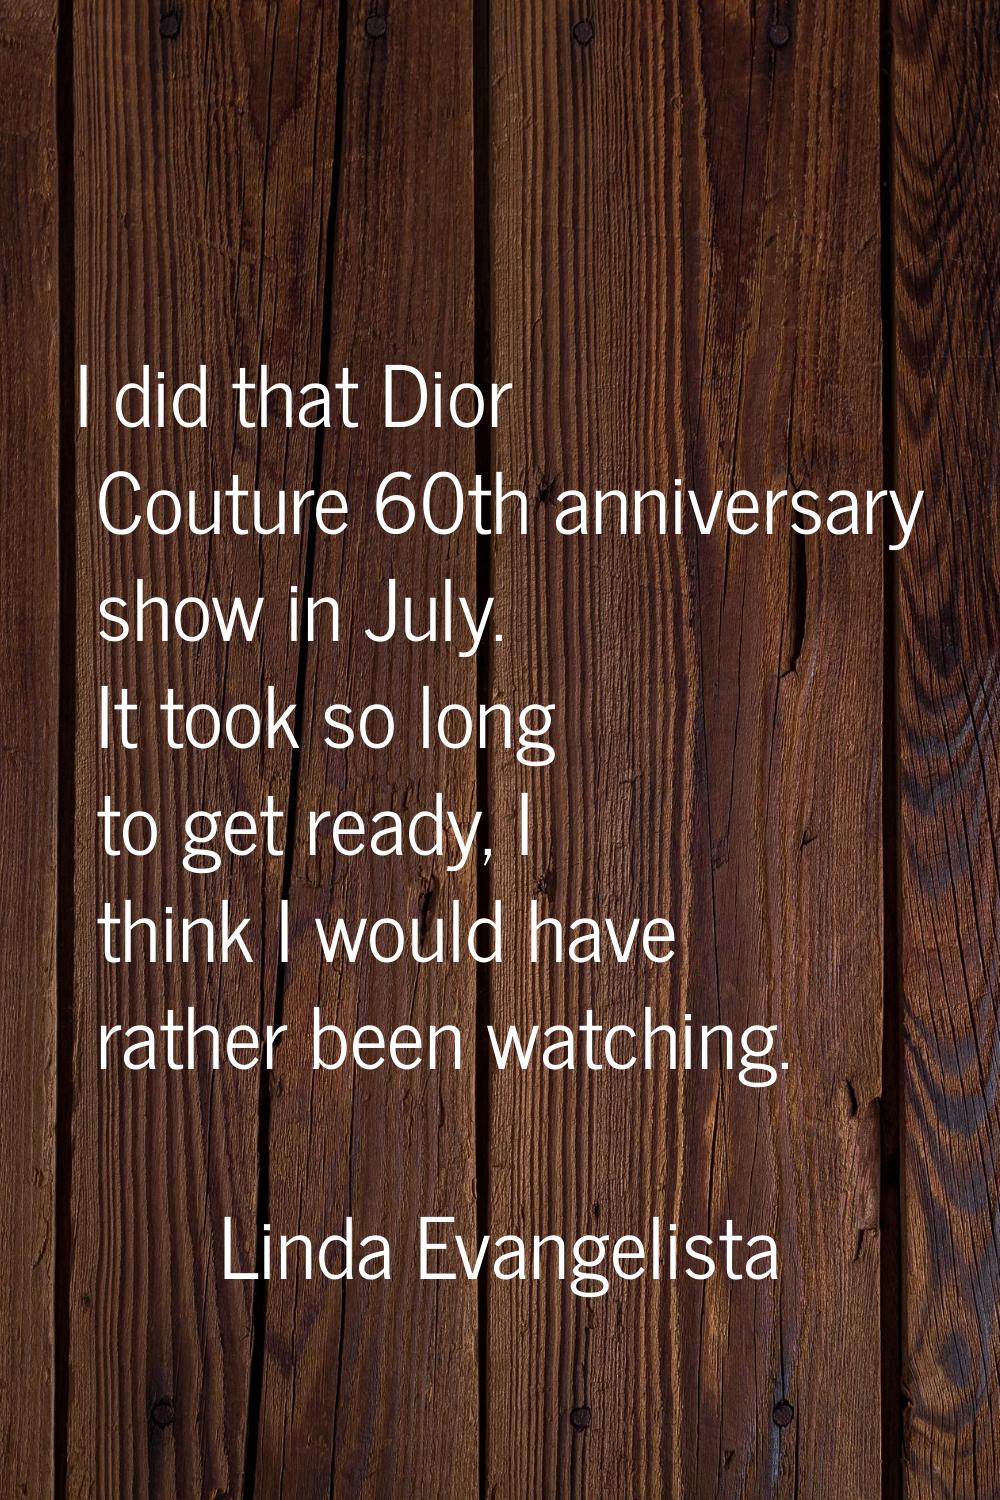 I did that Dior Couture 60th anniversary show in July. It took so long to get ready, I think I woul